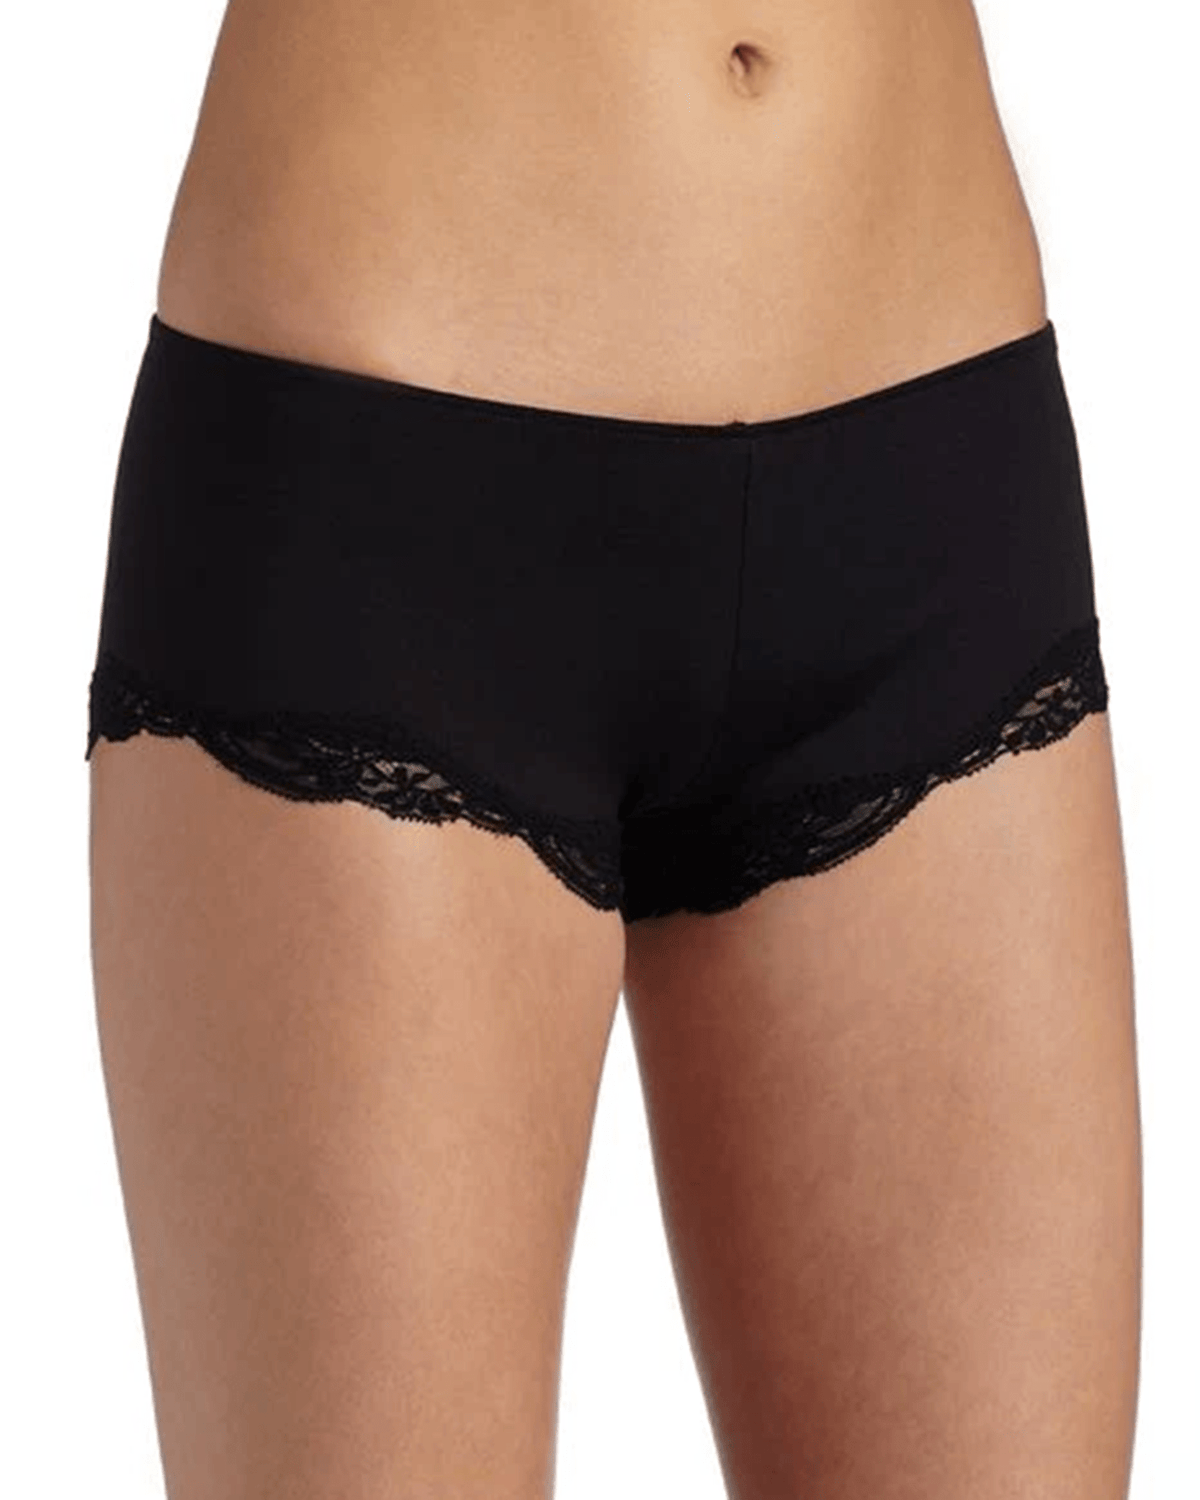 Only Hearts Lingerie Del w/ Lace Hipster in Black